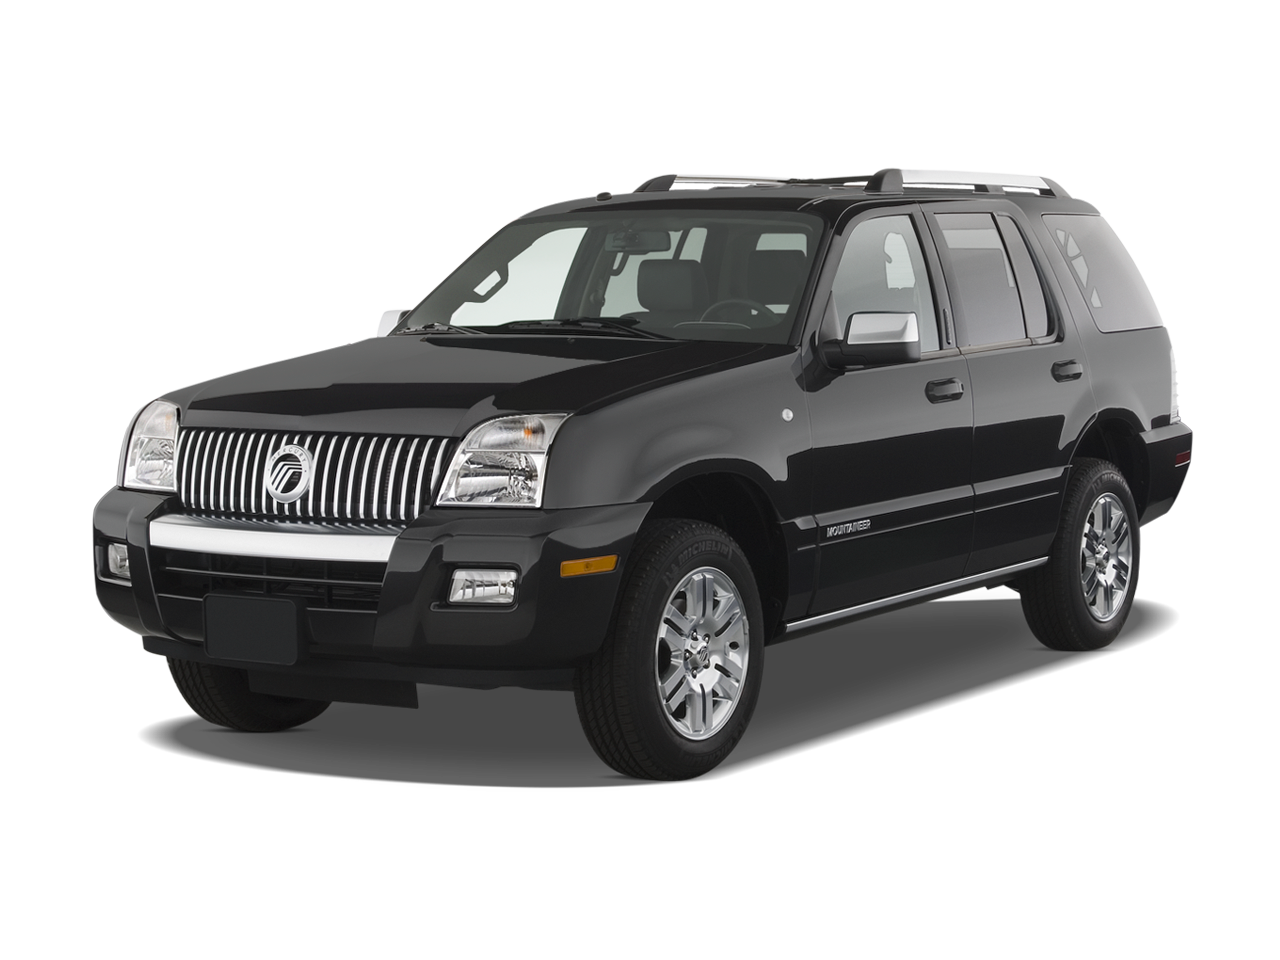 2010 Mercury Mountaineer Prices, Reviews, and Photos - MotorTrend